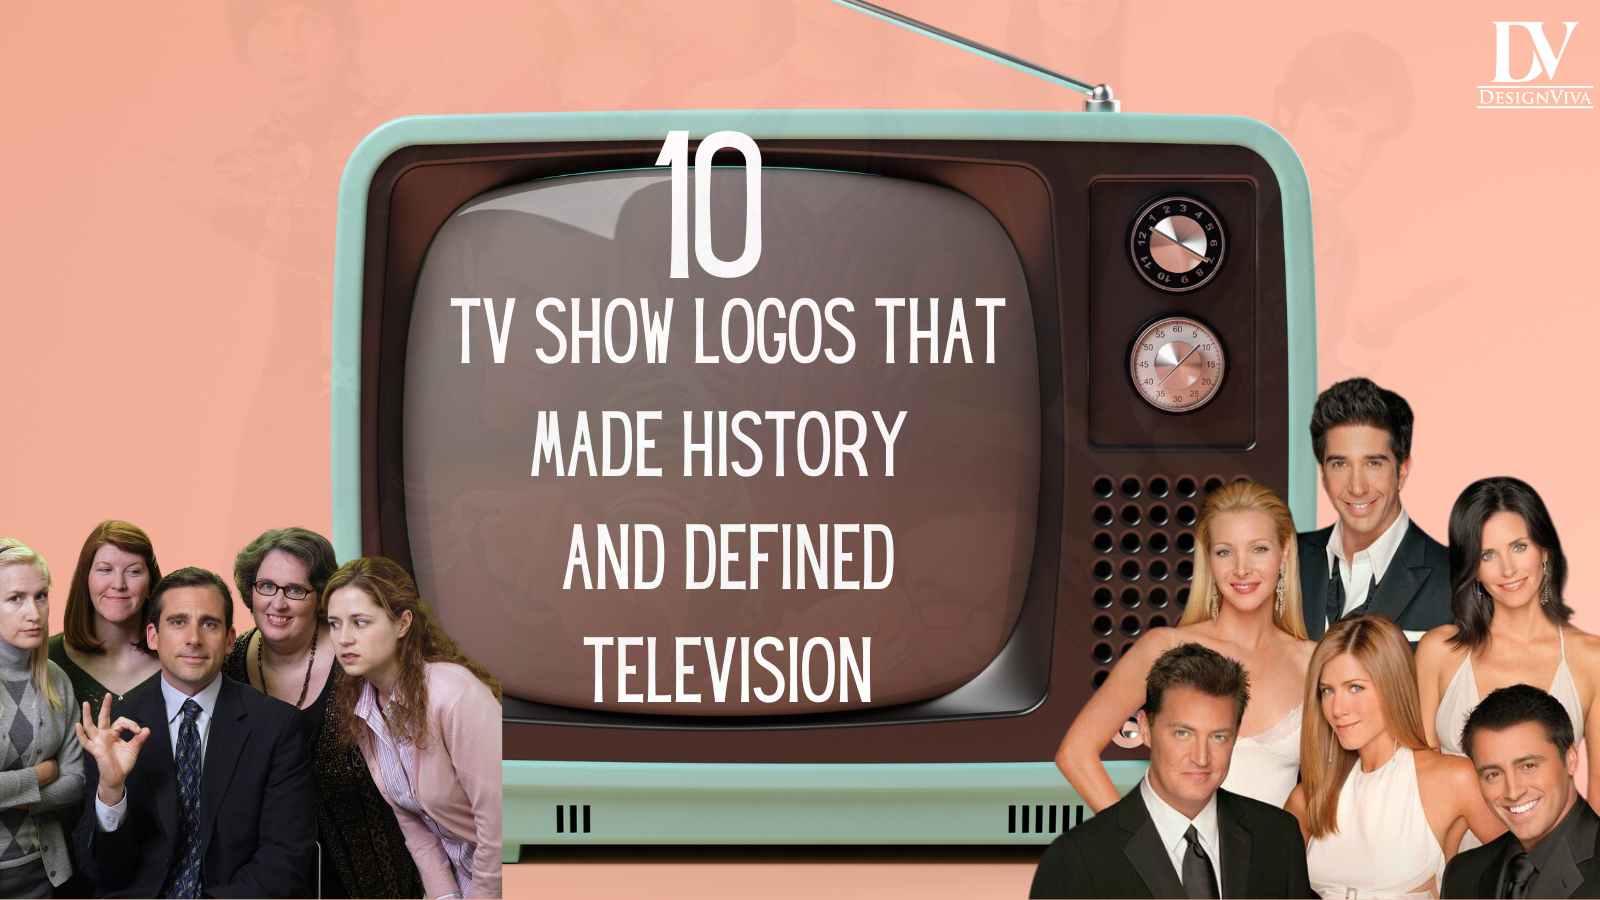 10 TV Show Logos That Made History and Defined Television